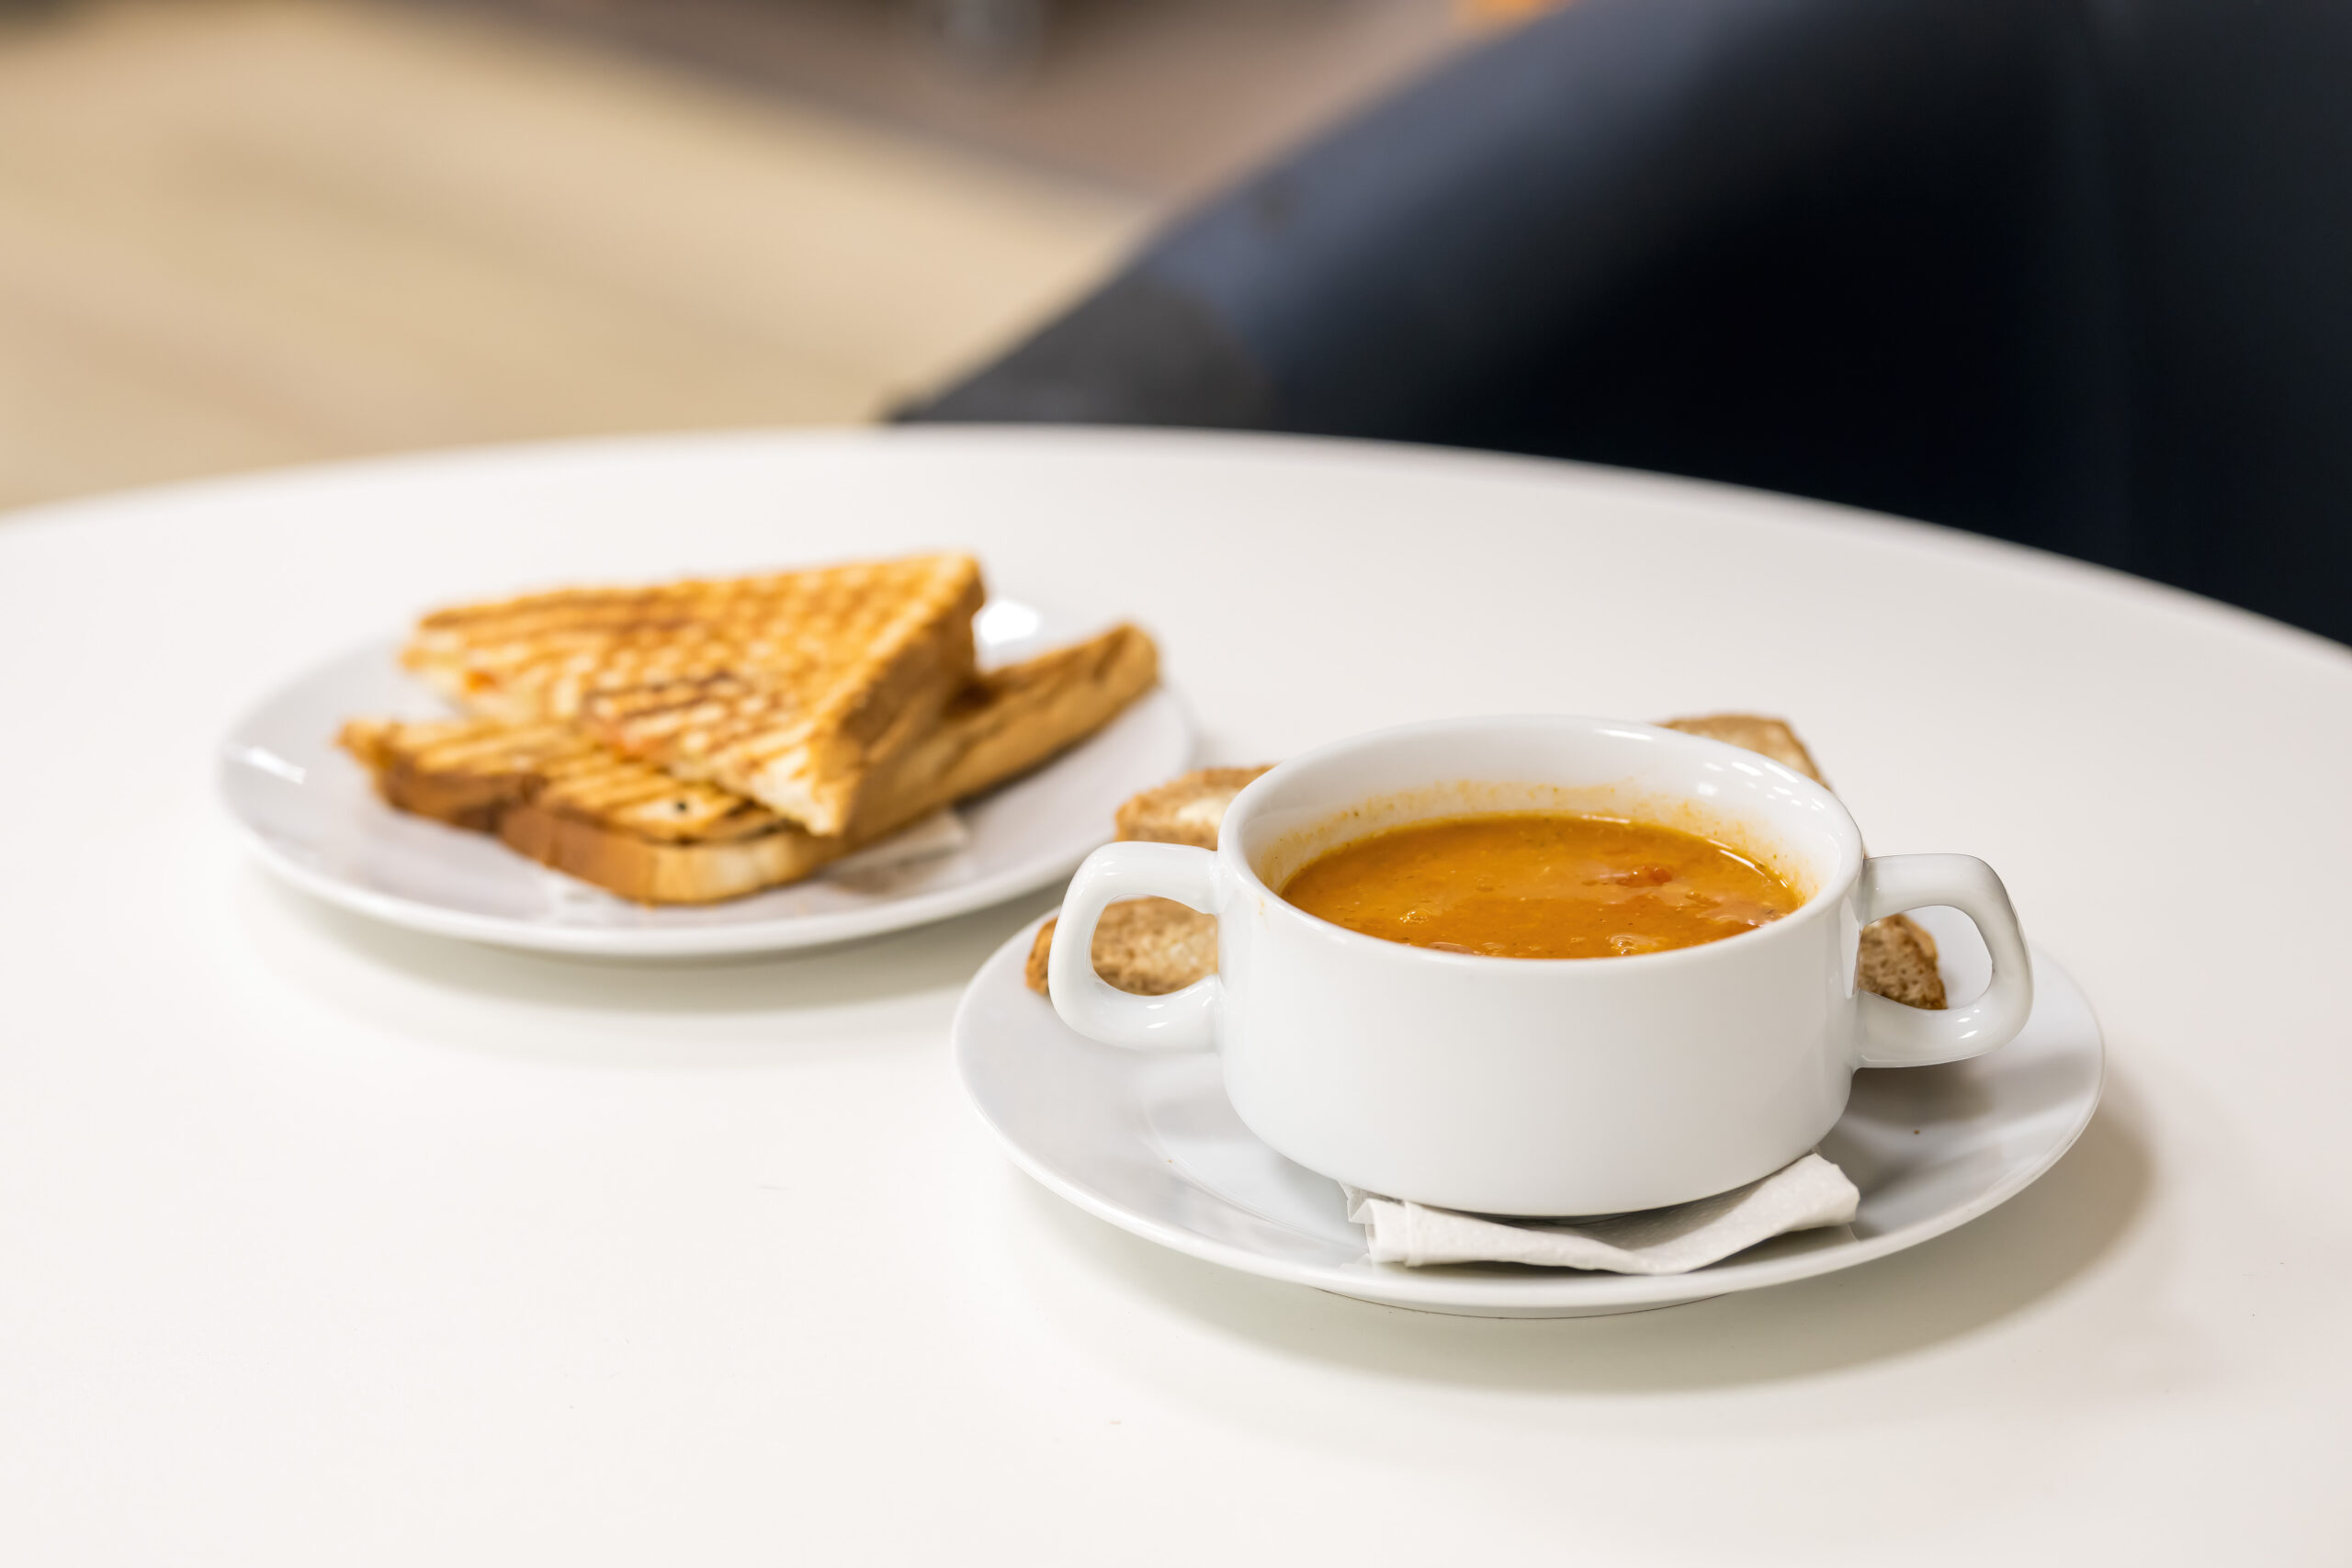 A bowl of soup and a plate with a toastie sits on a white table.